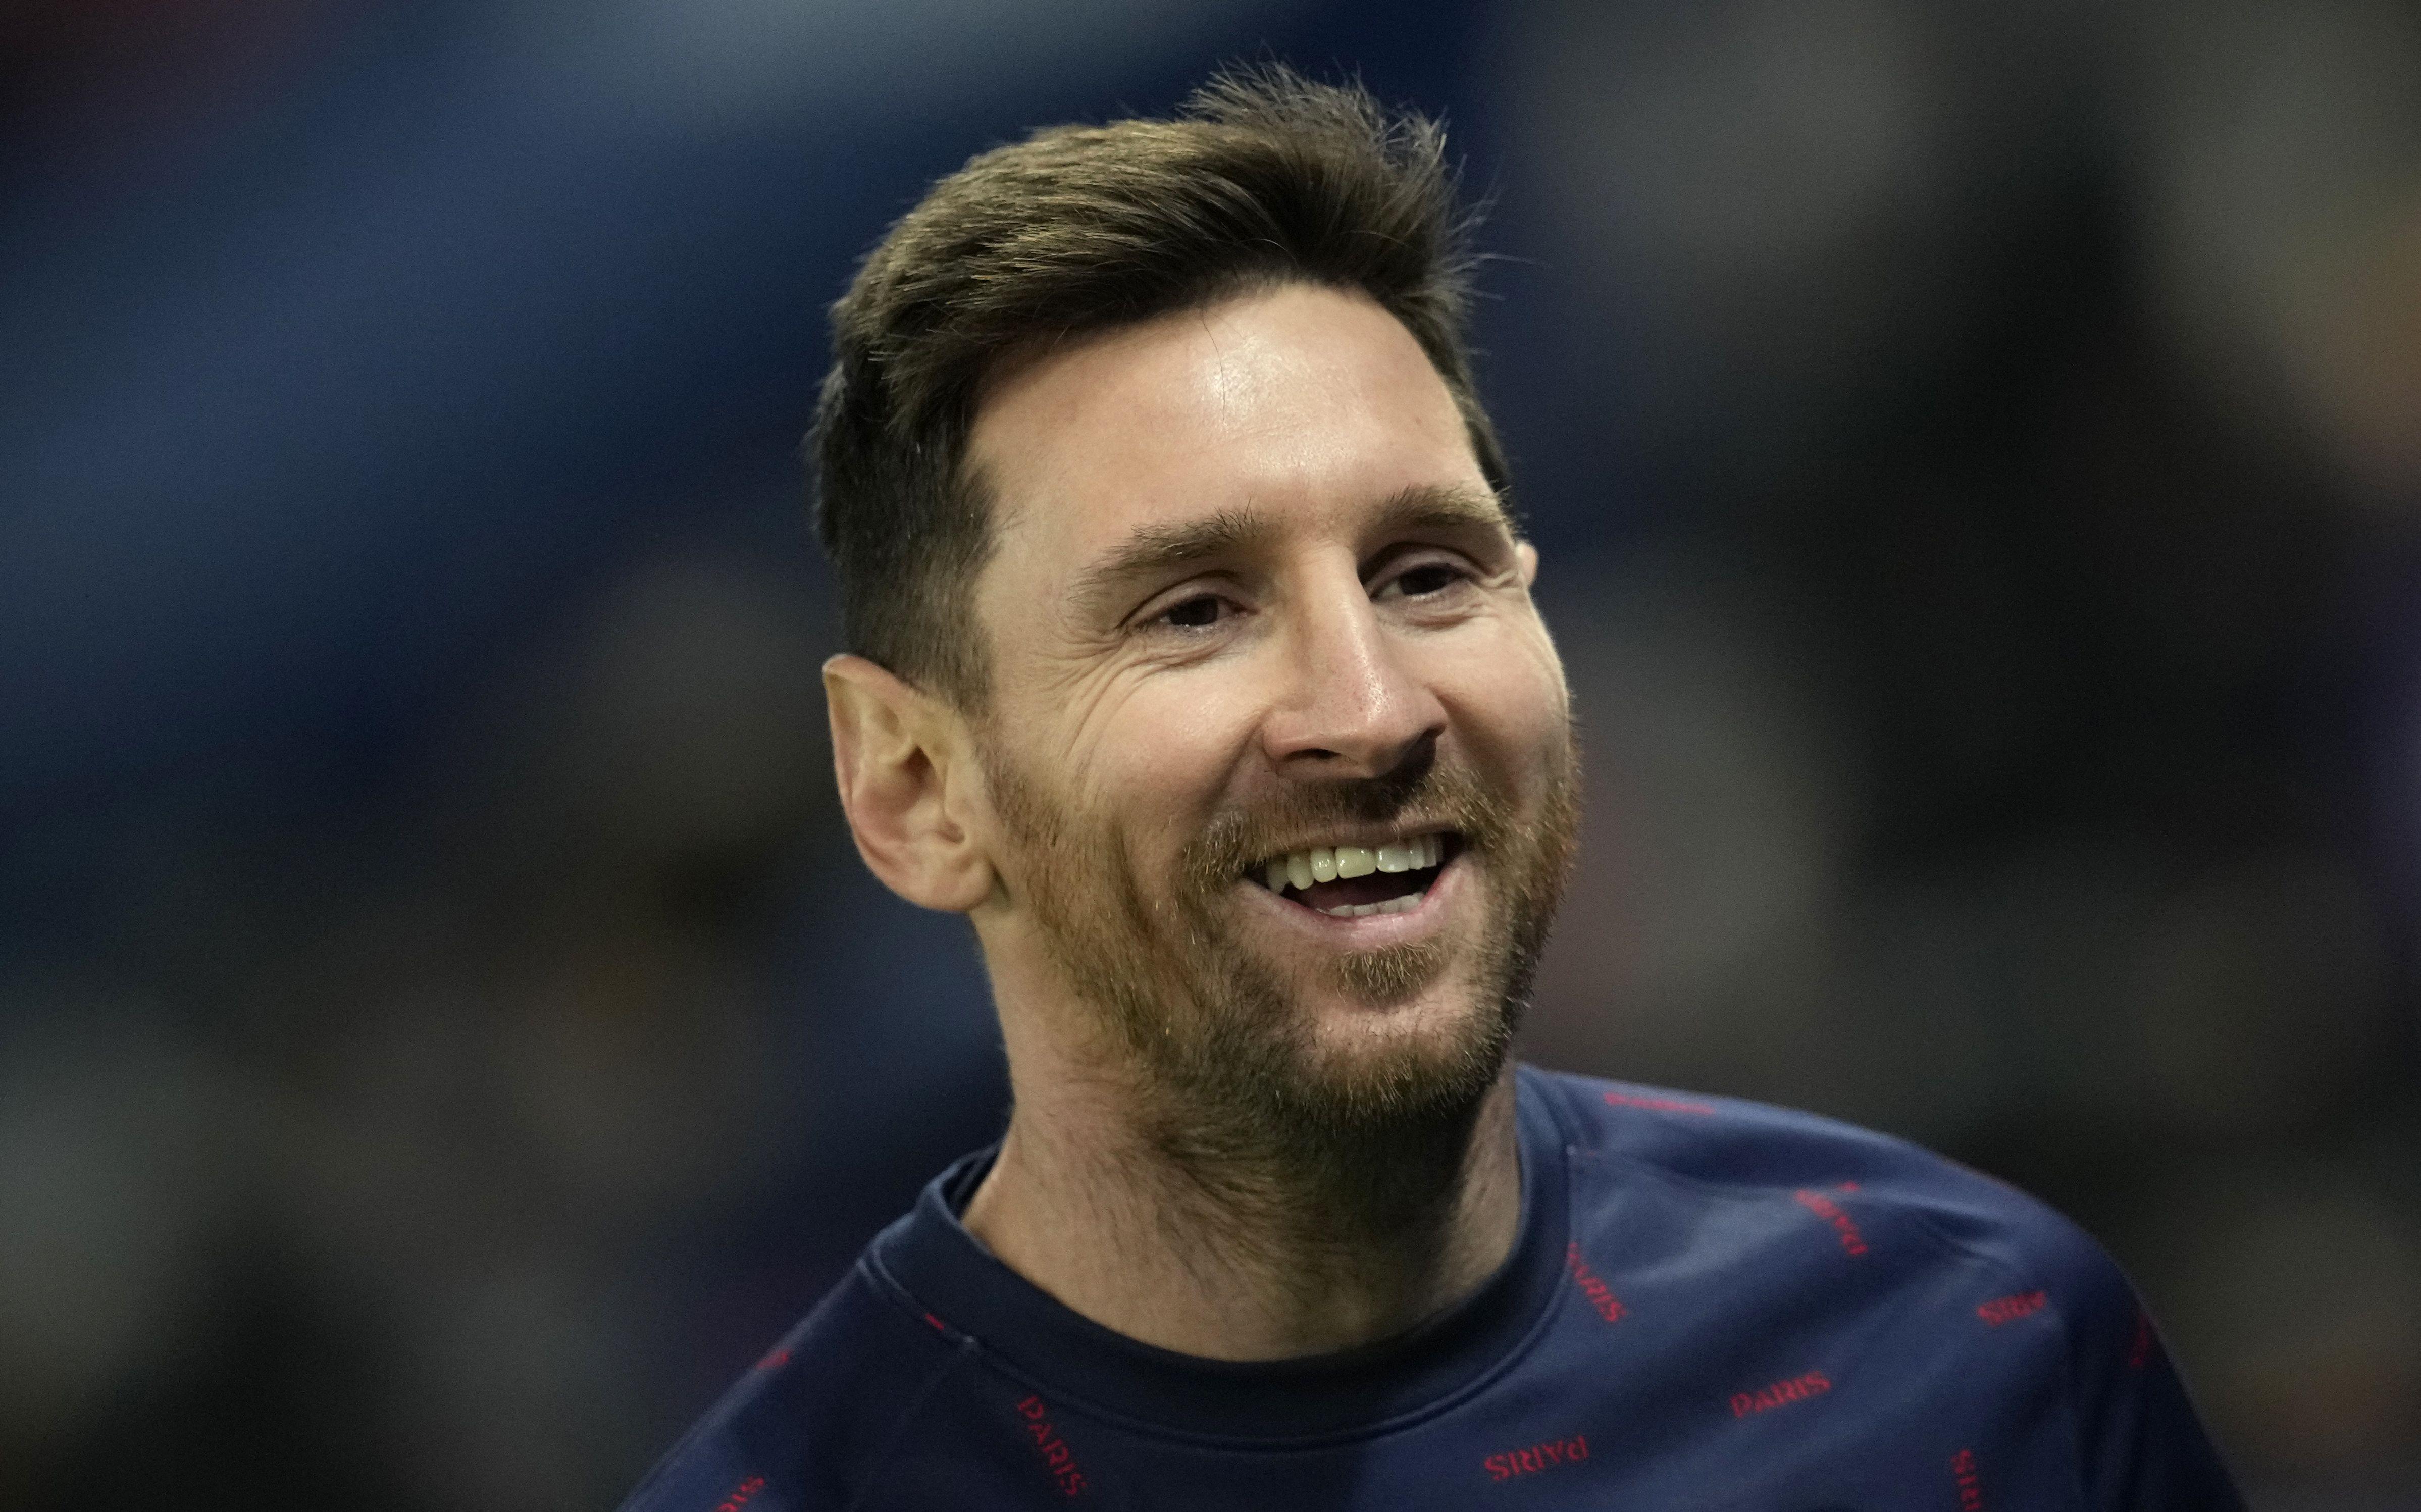 Lionel Messi among 4 PSG players who test positive for COVID 19